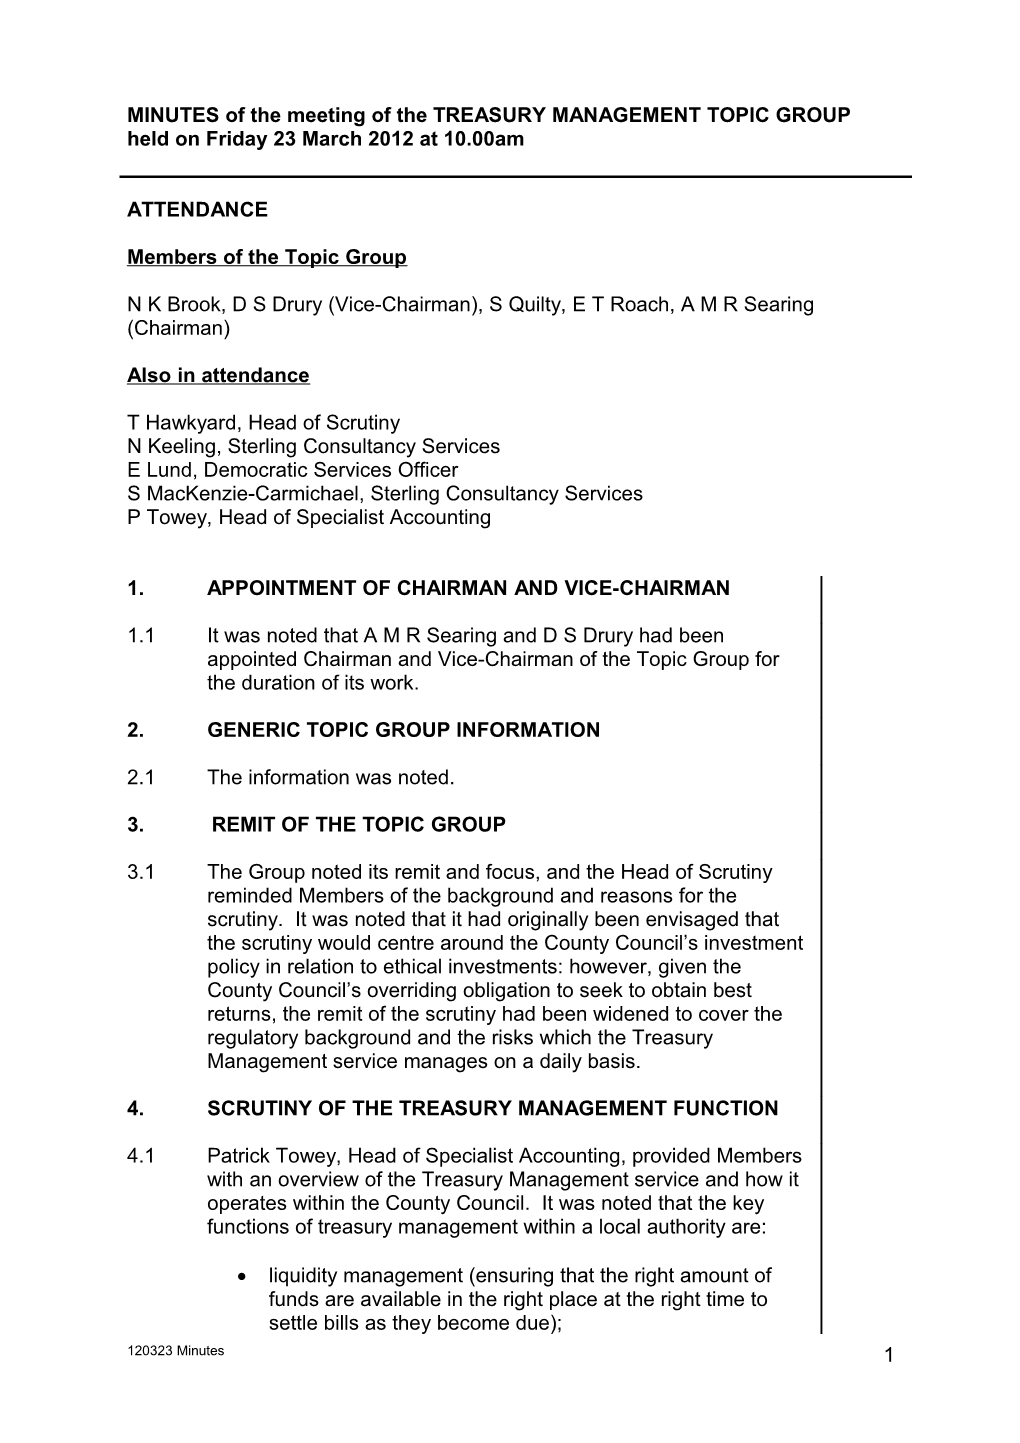 Minutes of the Meeting of the Treasury Management Topic Group Held on Friday 23 March 2012